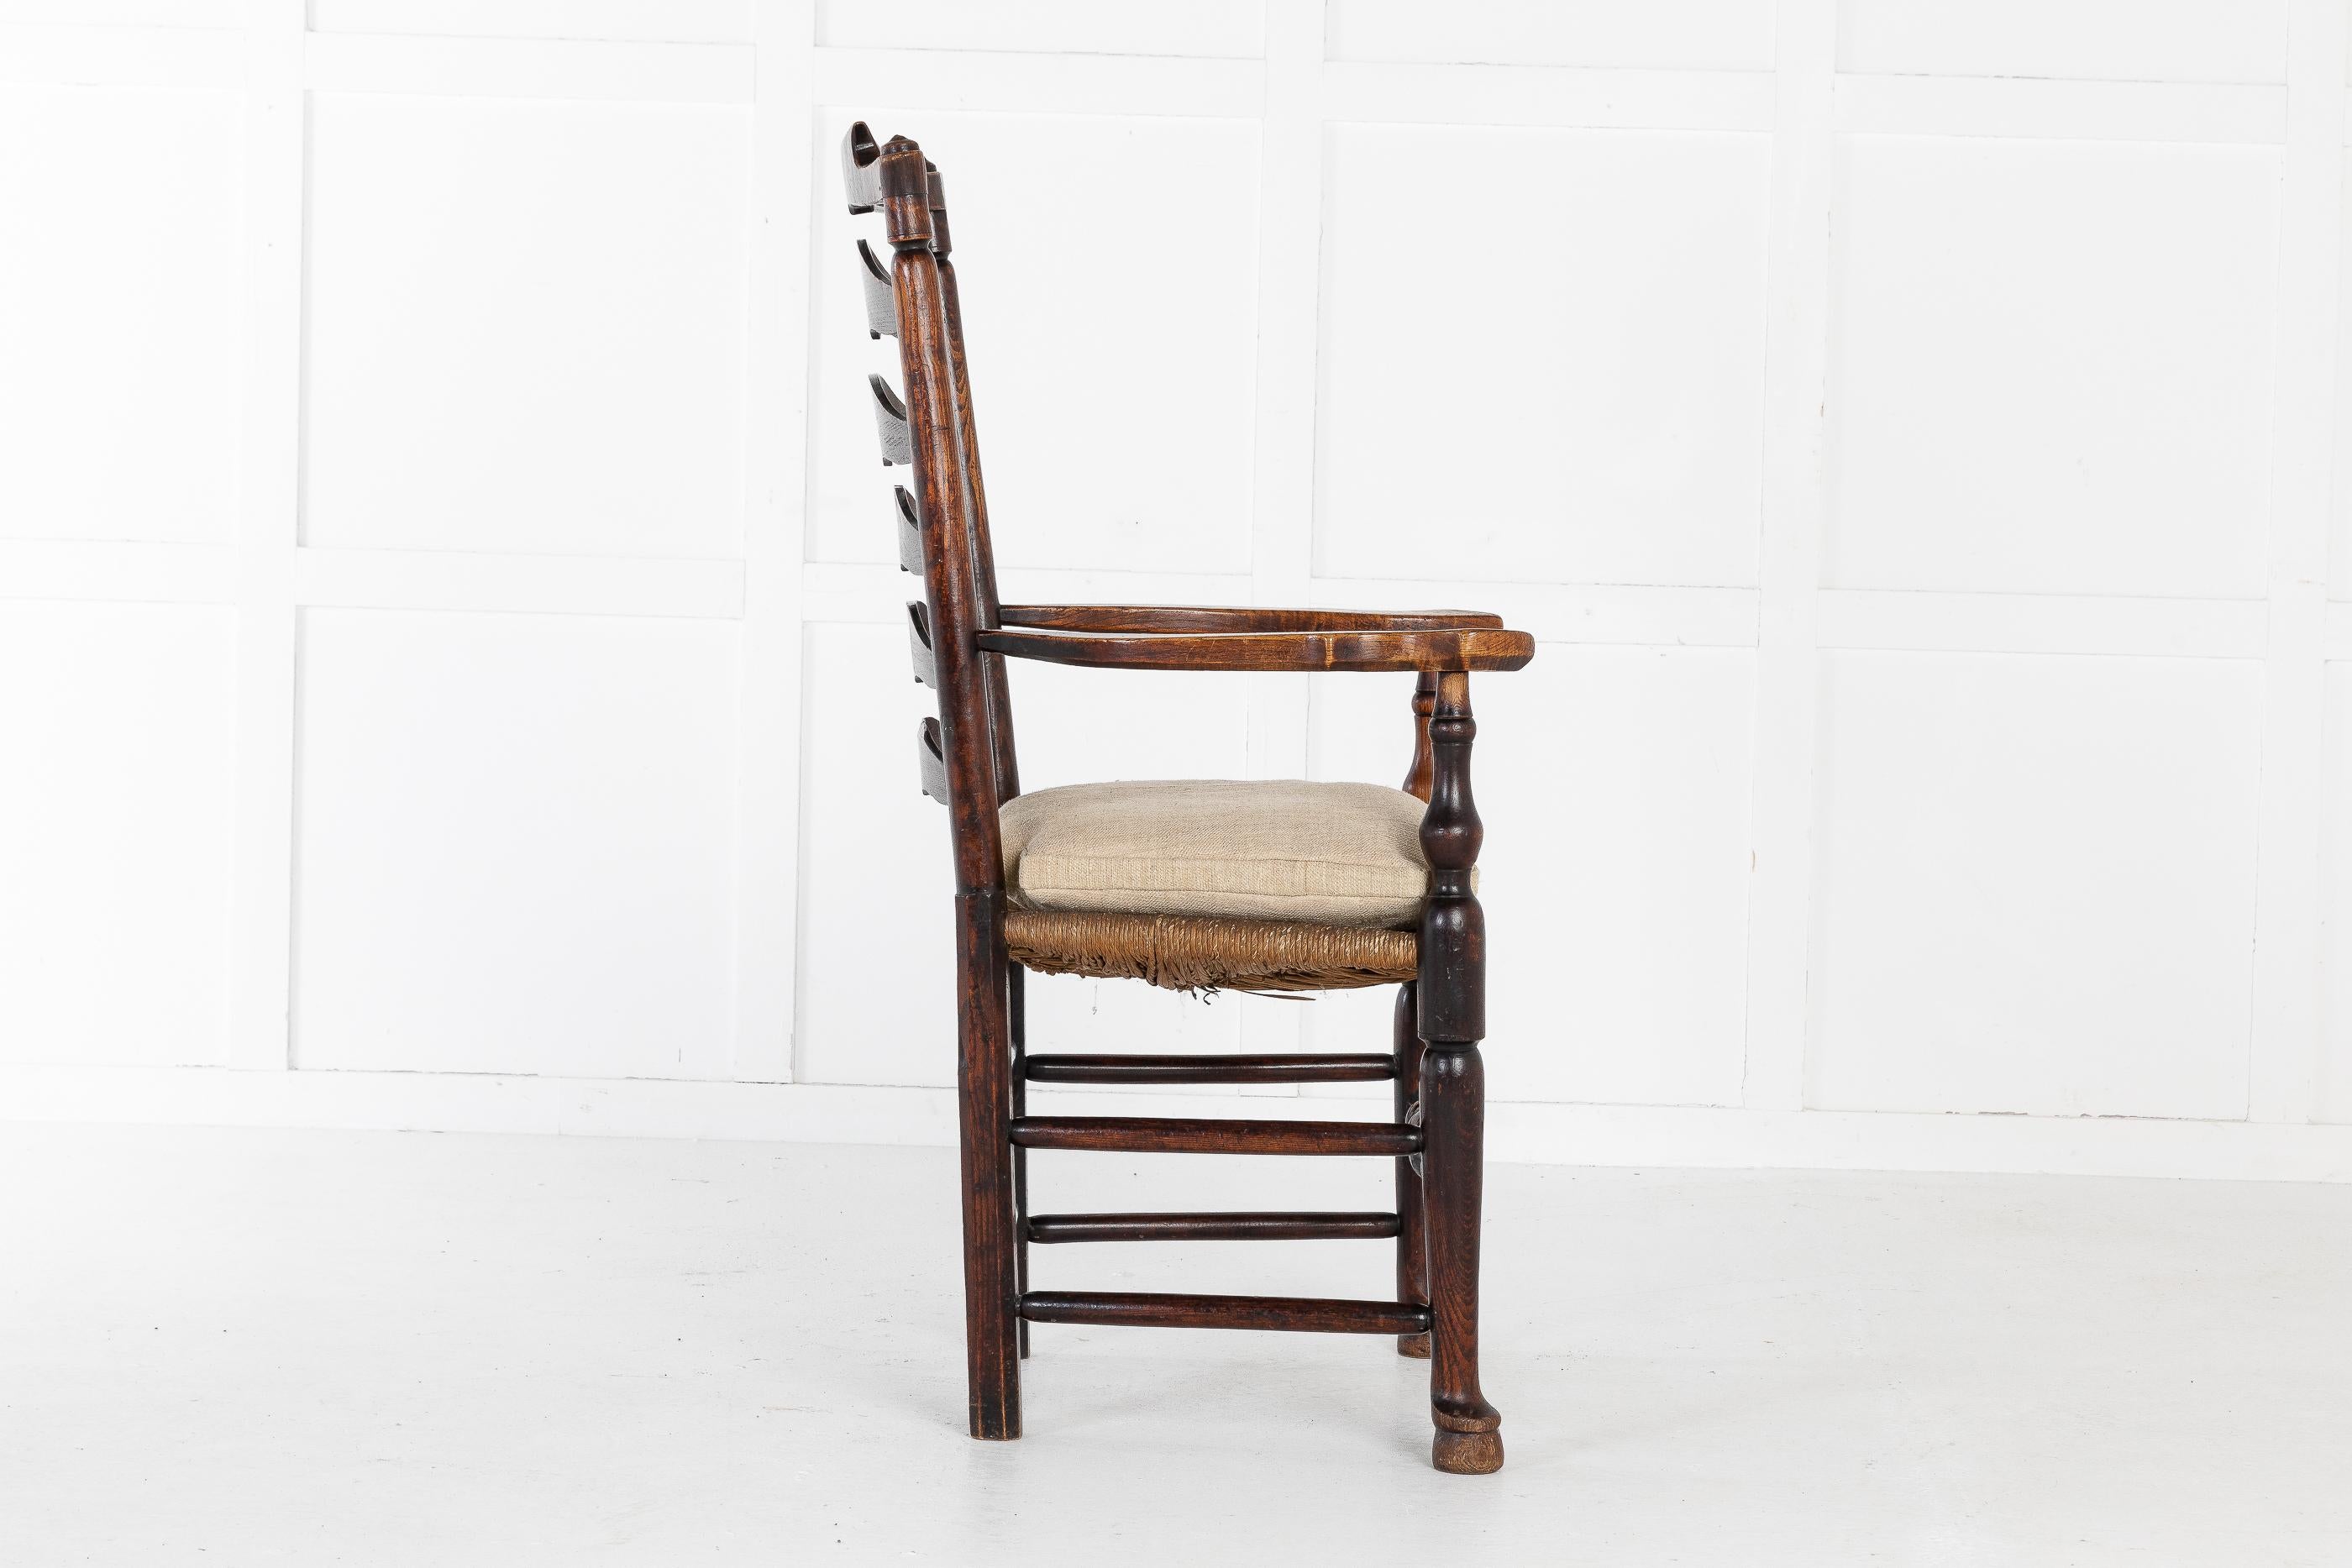 18th century English elm ladder-back carver chair. A good, large sized chair. The elm timber is a fabulous colour. There is slight damage to the rush protected by seat cushion.
Measures: Seat height 50cm
Seat depth 43cm.